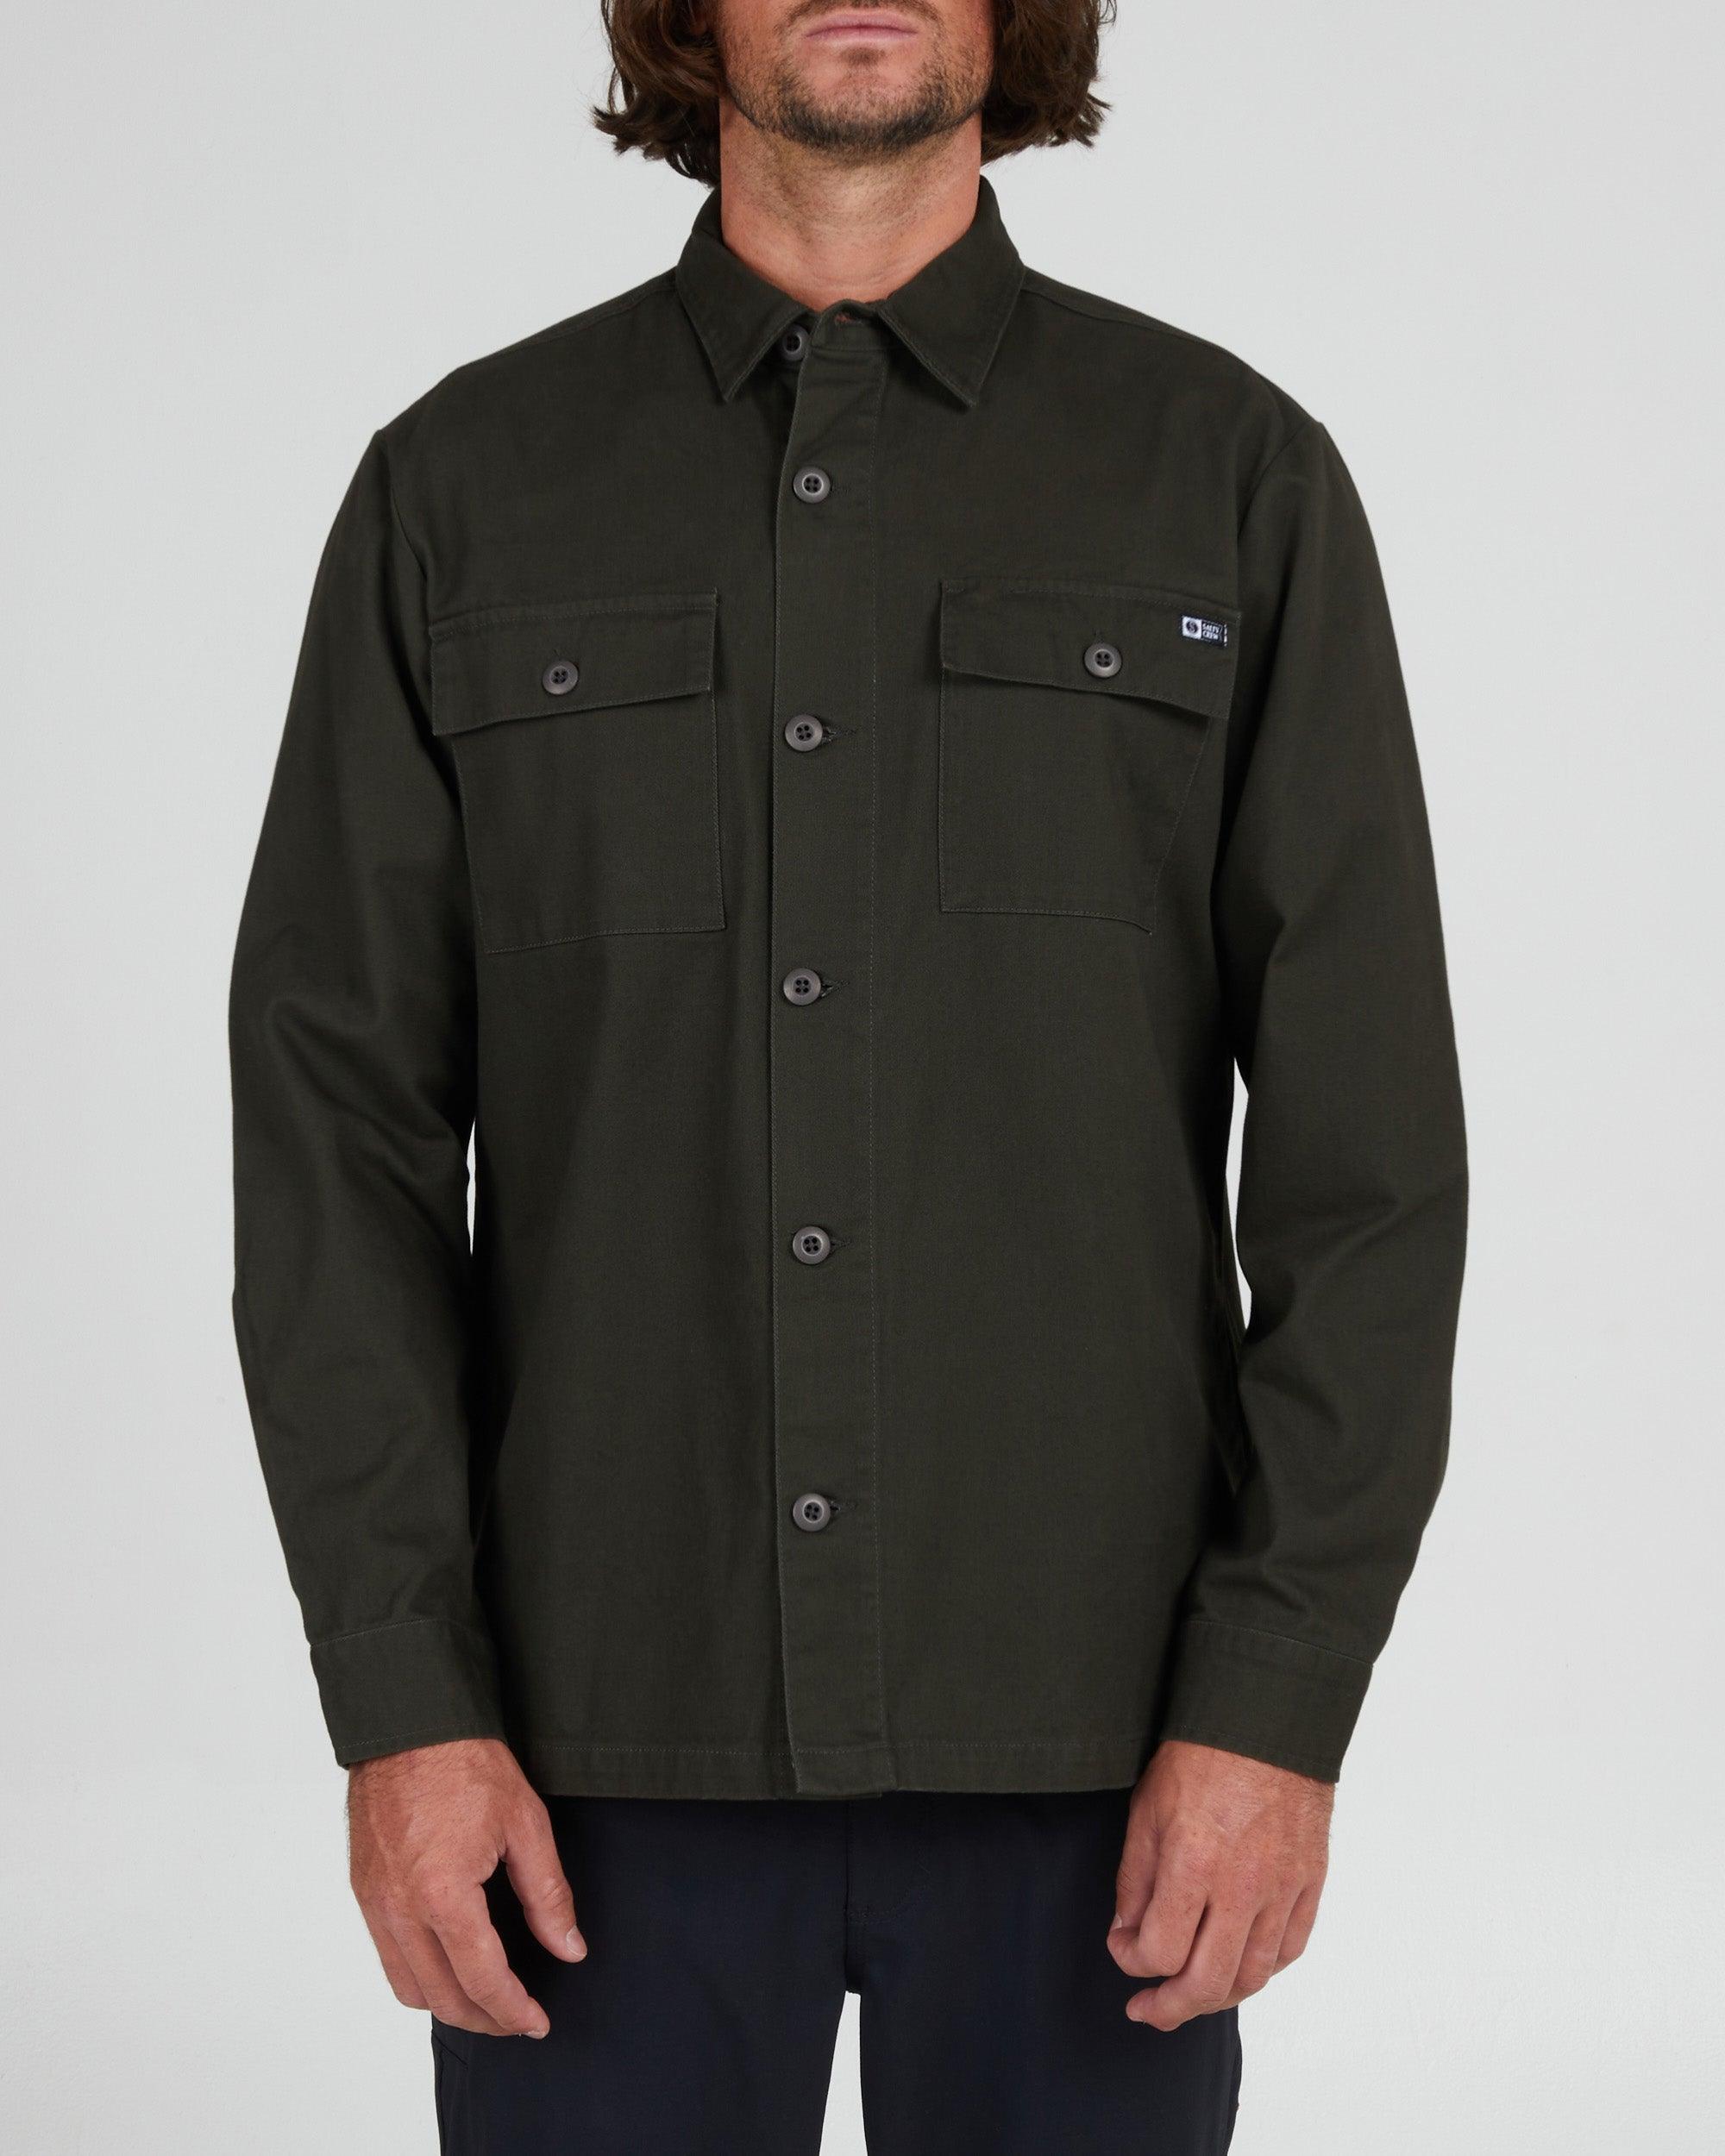 Ranger Faded L/S Woven - Black - Purpose-Built / Home of the Trades